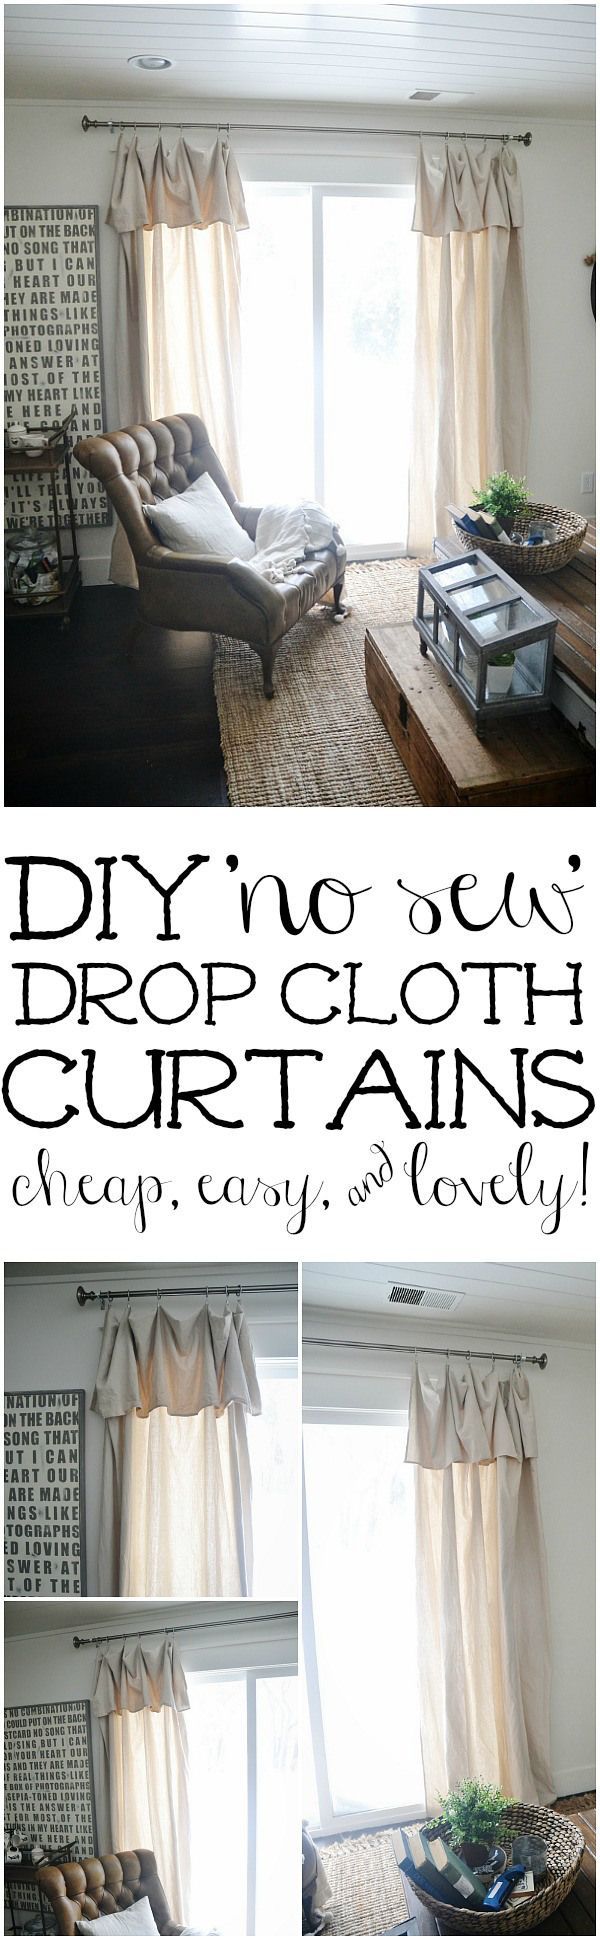 DIY No-Sew Drop Cloth Curtains – The cheapest & easiest DIY curtains ever!